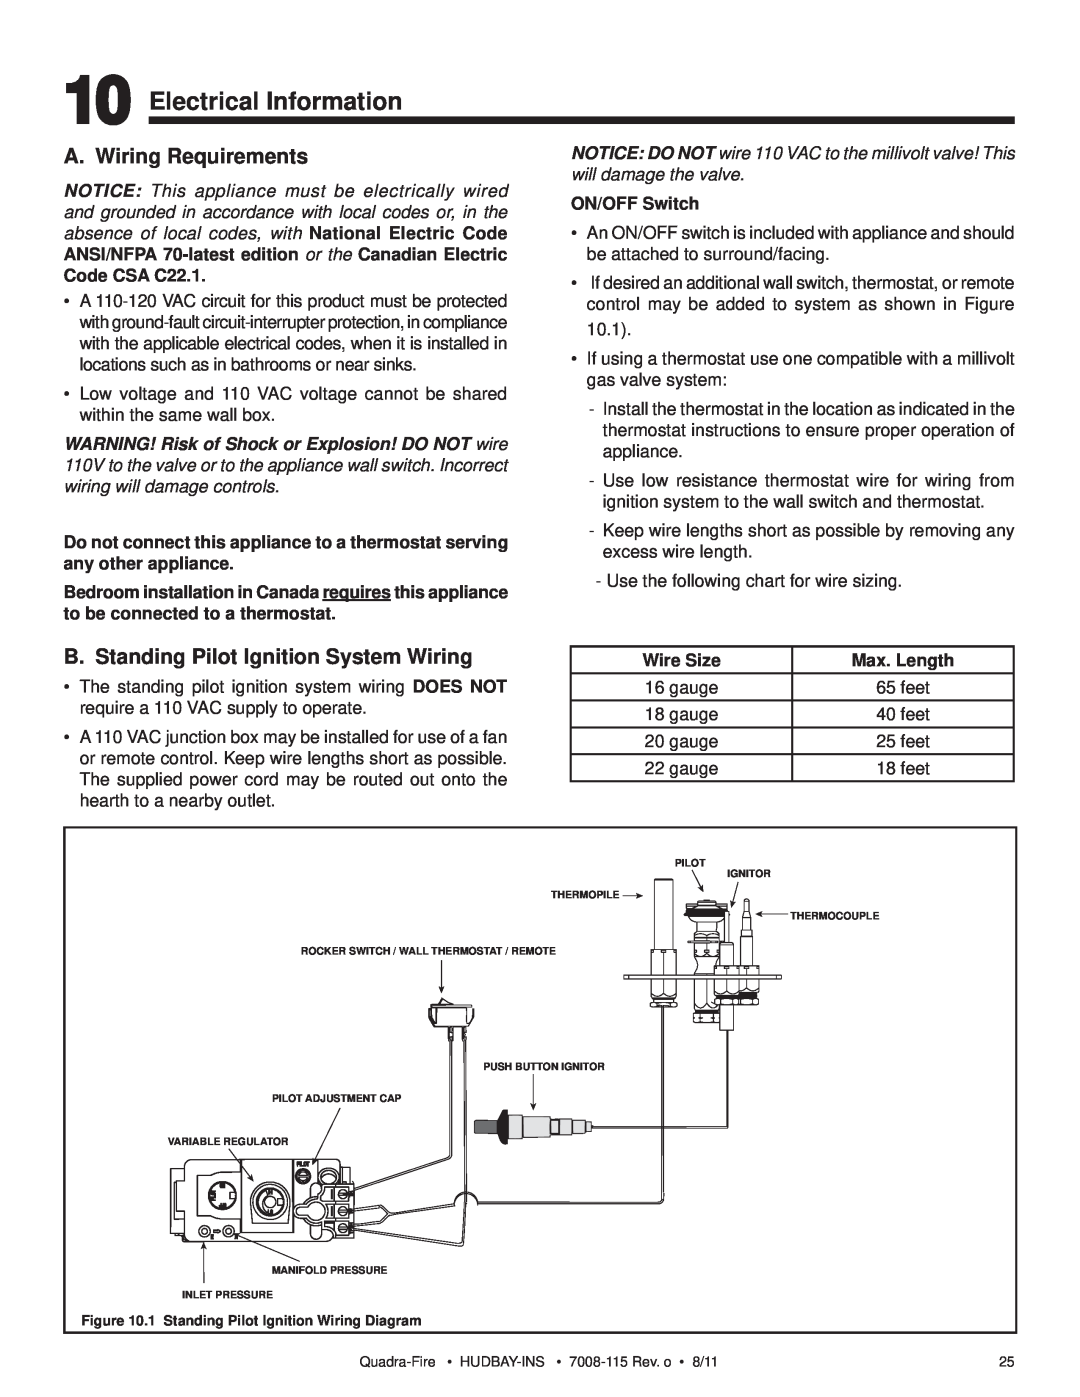 Quadra-Fire 7008-115 Electrical Information, A. Wiring Requirements, B. Standing Pilot Ignition System Wiring, Wire Size 